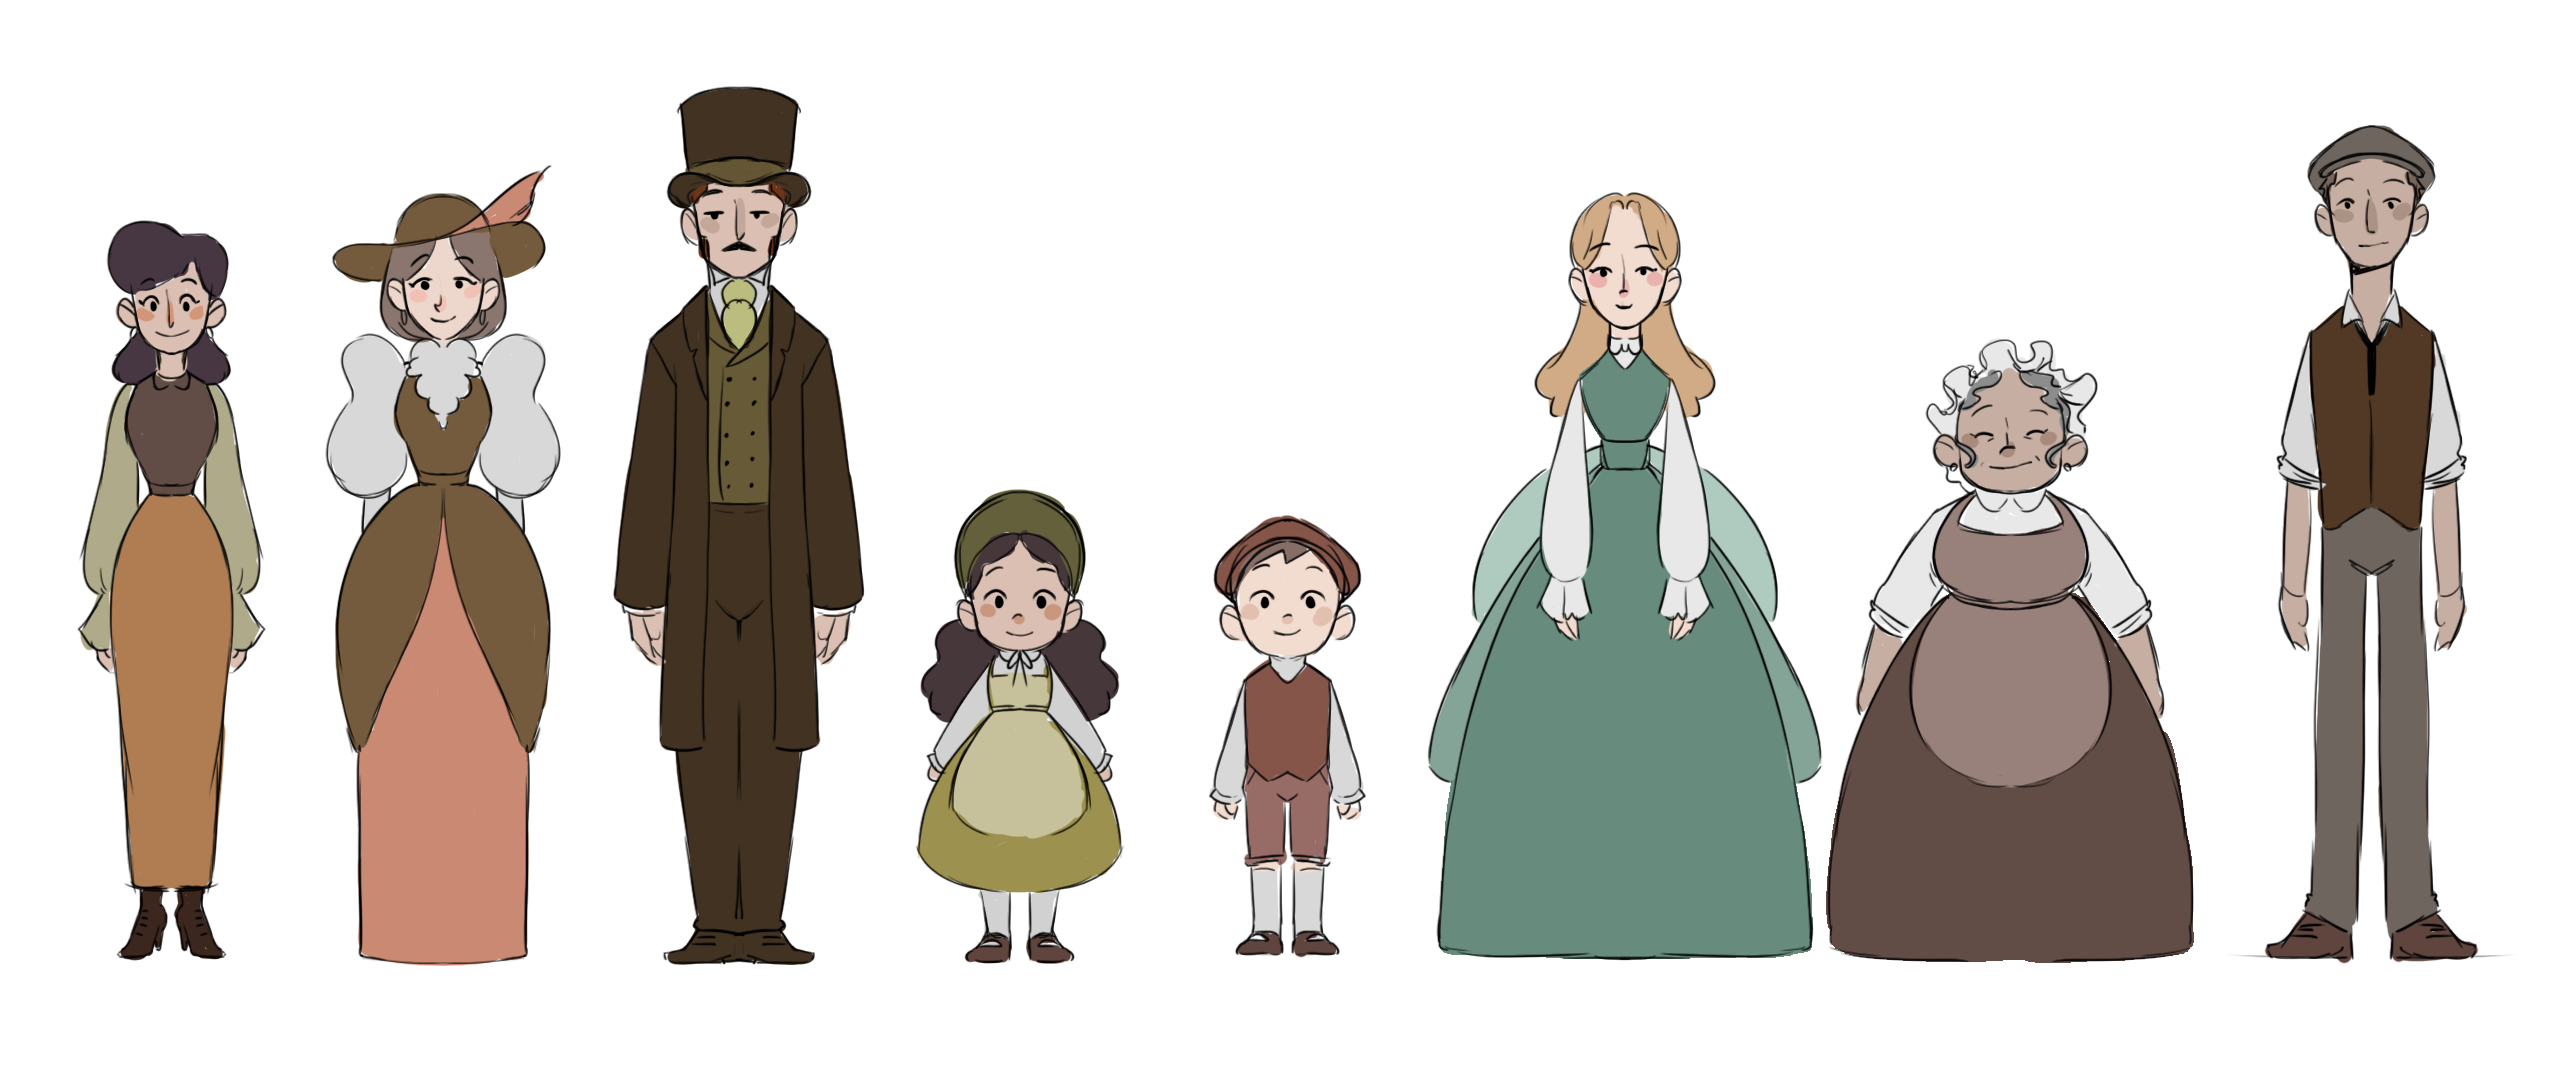 Lineup of the background characters of the film. In order from left to right: a woman with an orange skirt and brown hair and shirt; a woman with a fancy brown and pink dress and a hat; a tall man with a brown suit and hat; a little girl with a green dress and hat; a boy with a red vest and hat; a woman with a big blue dress and blond hair; an old woman with a brown dress and apron; a tall man with a brown vest and gray pants and hat.